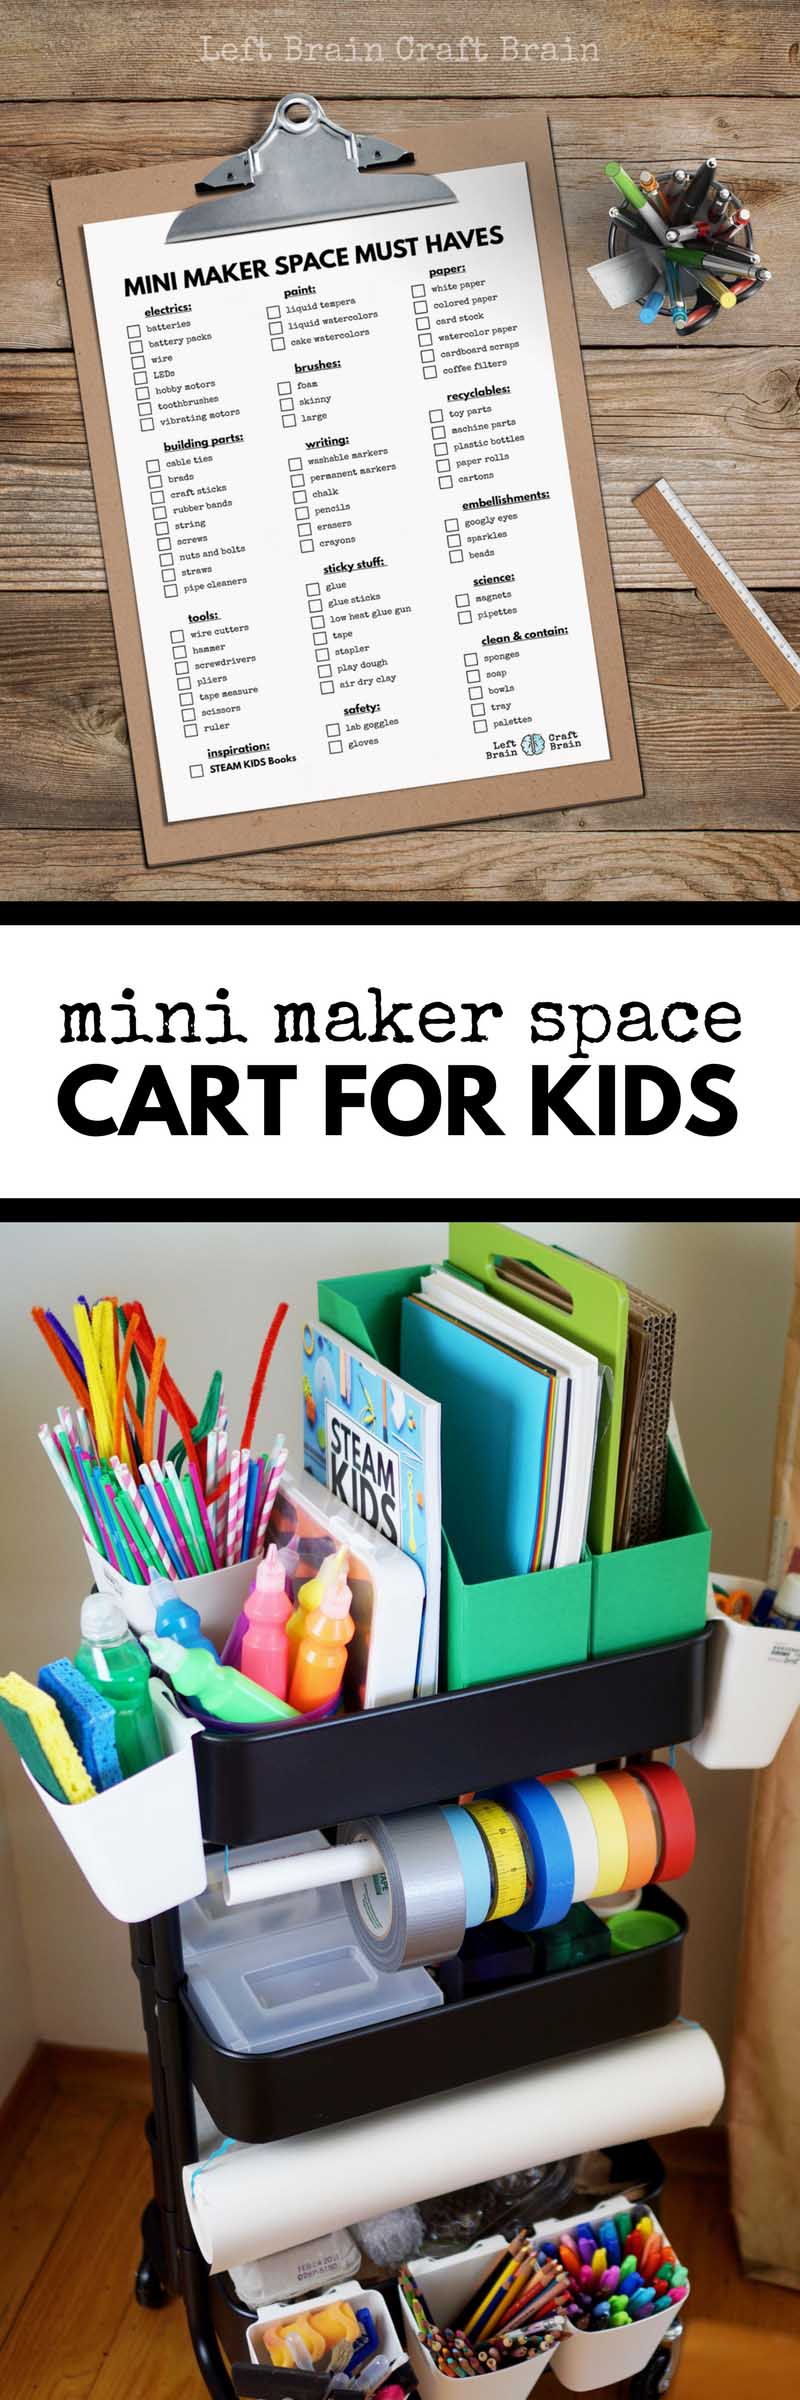 Use this helpful checklist to create a Mini Maker Space Cart for Kids filled with STEM & STEAM projects like circuits, art, and tinkering.